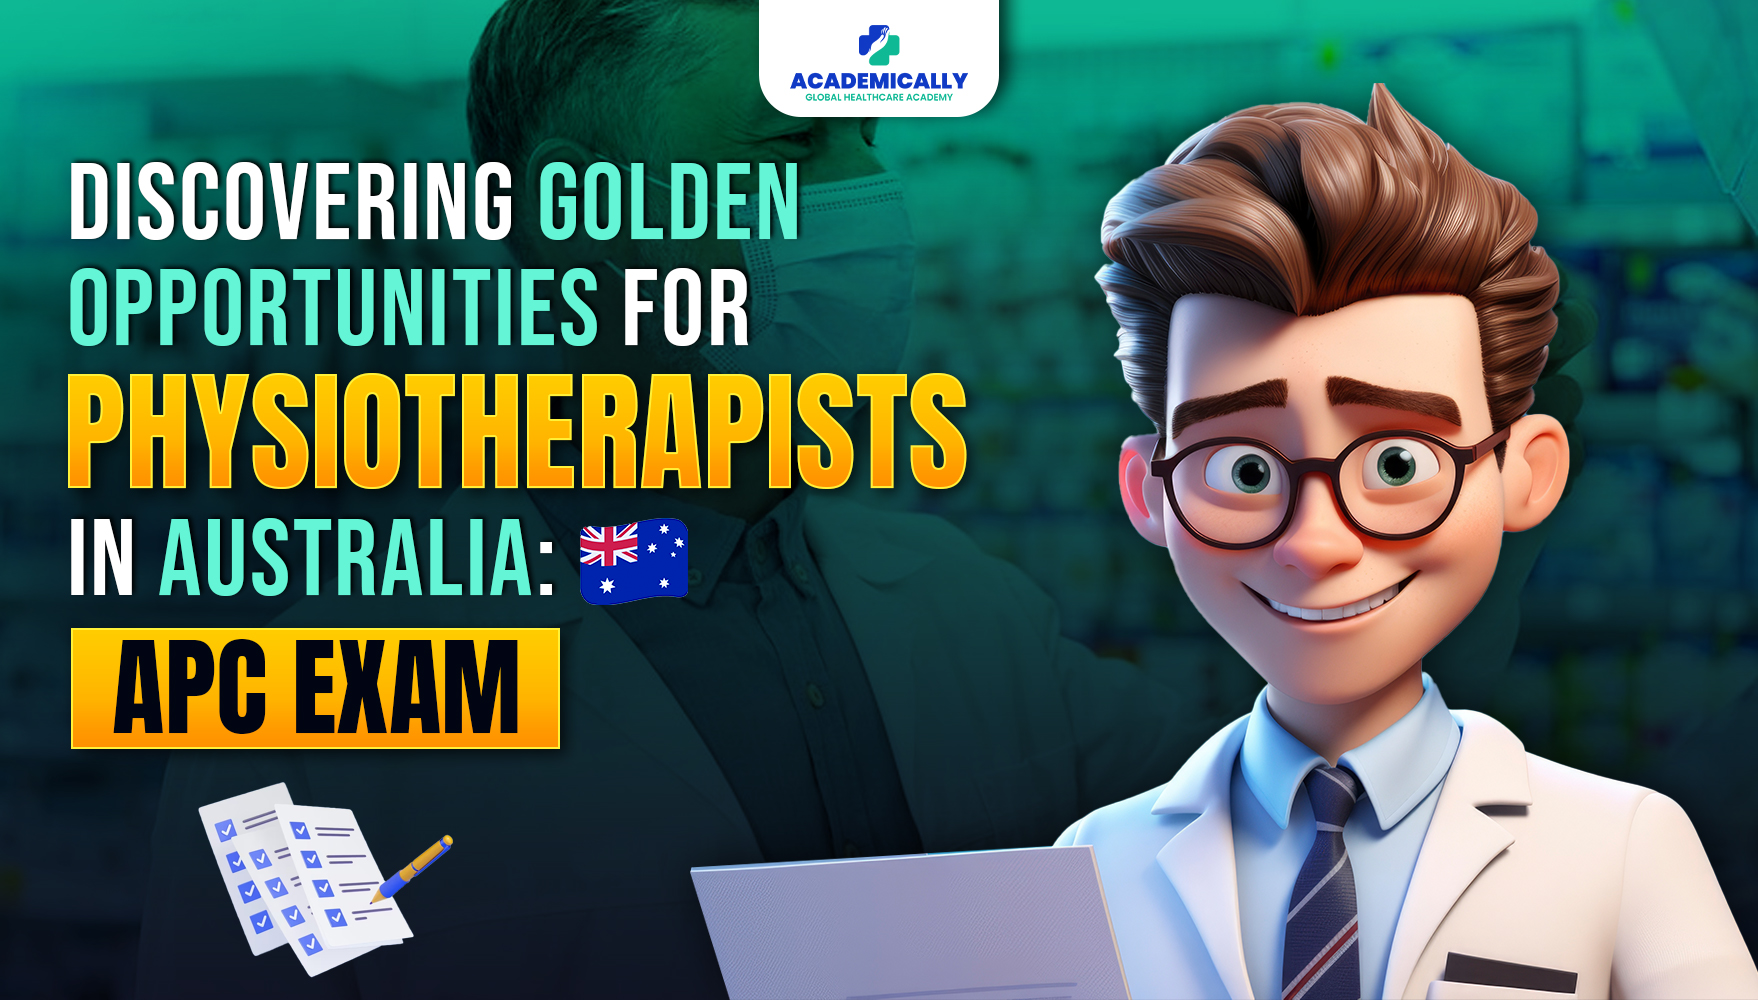 Opportunities for Physiotherapists in Australia